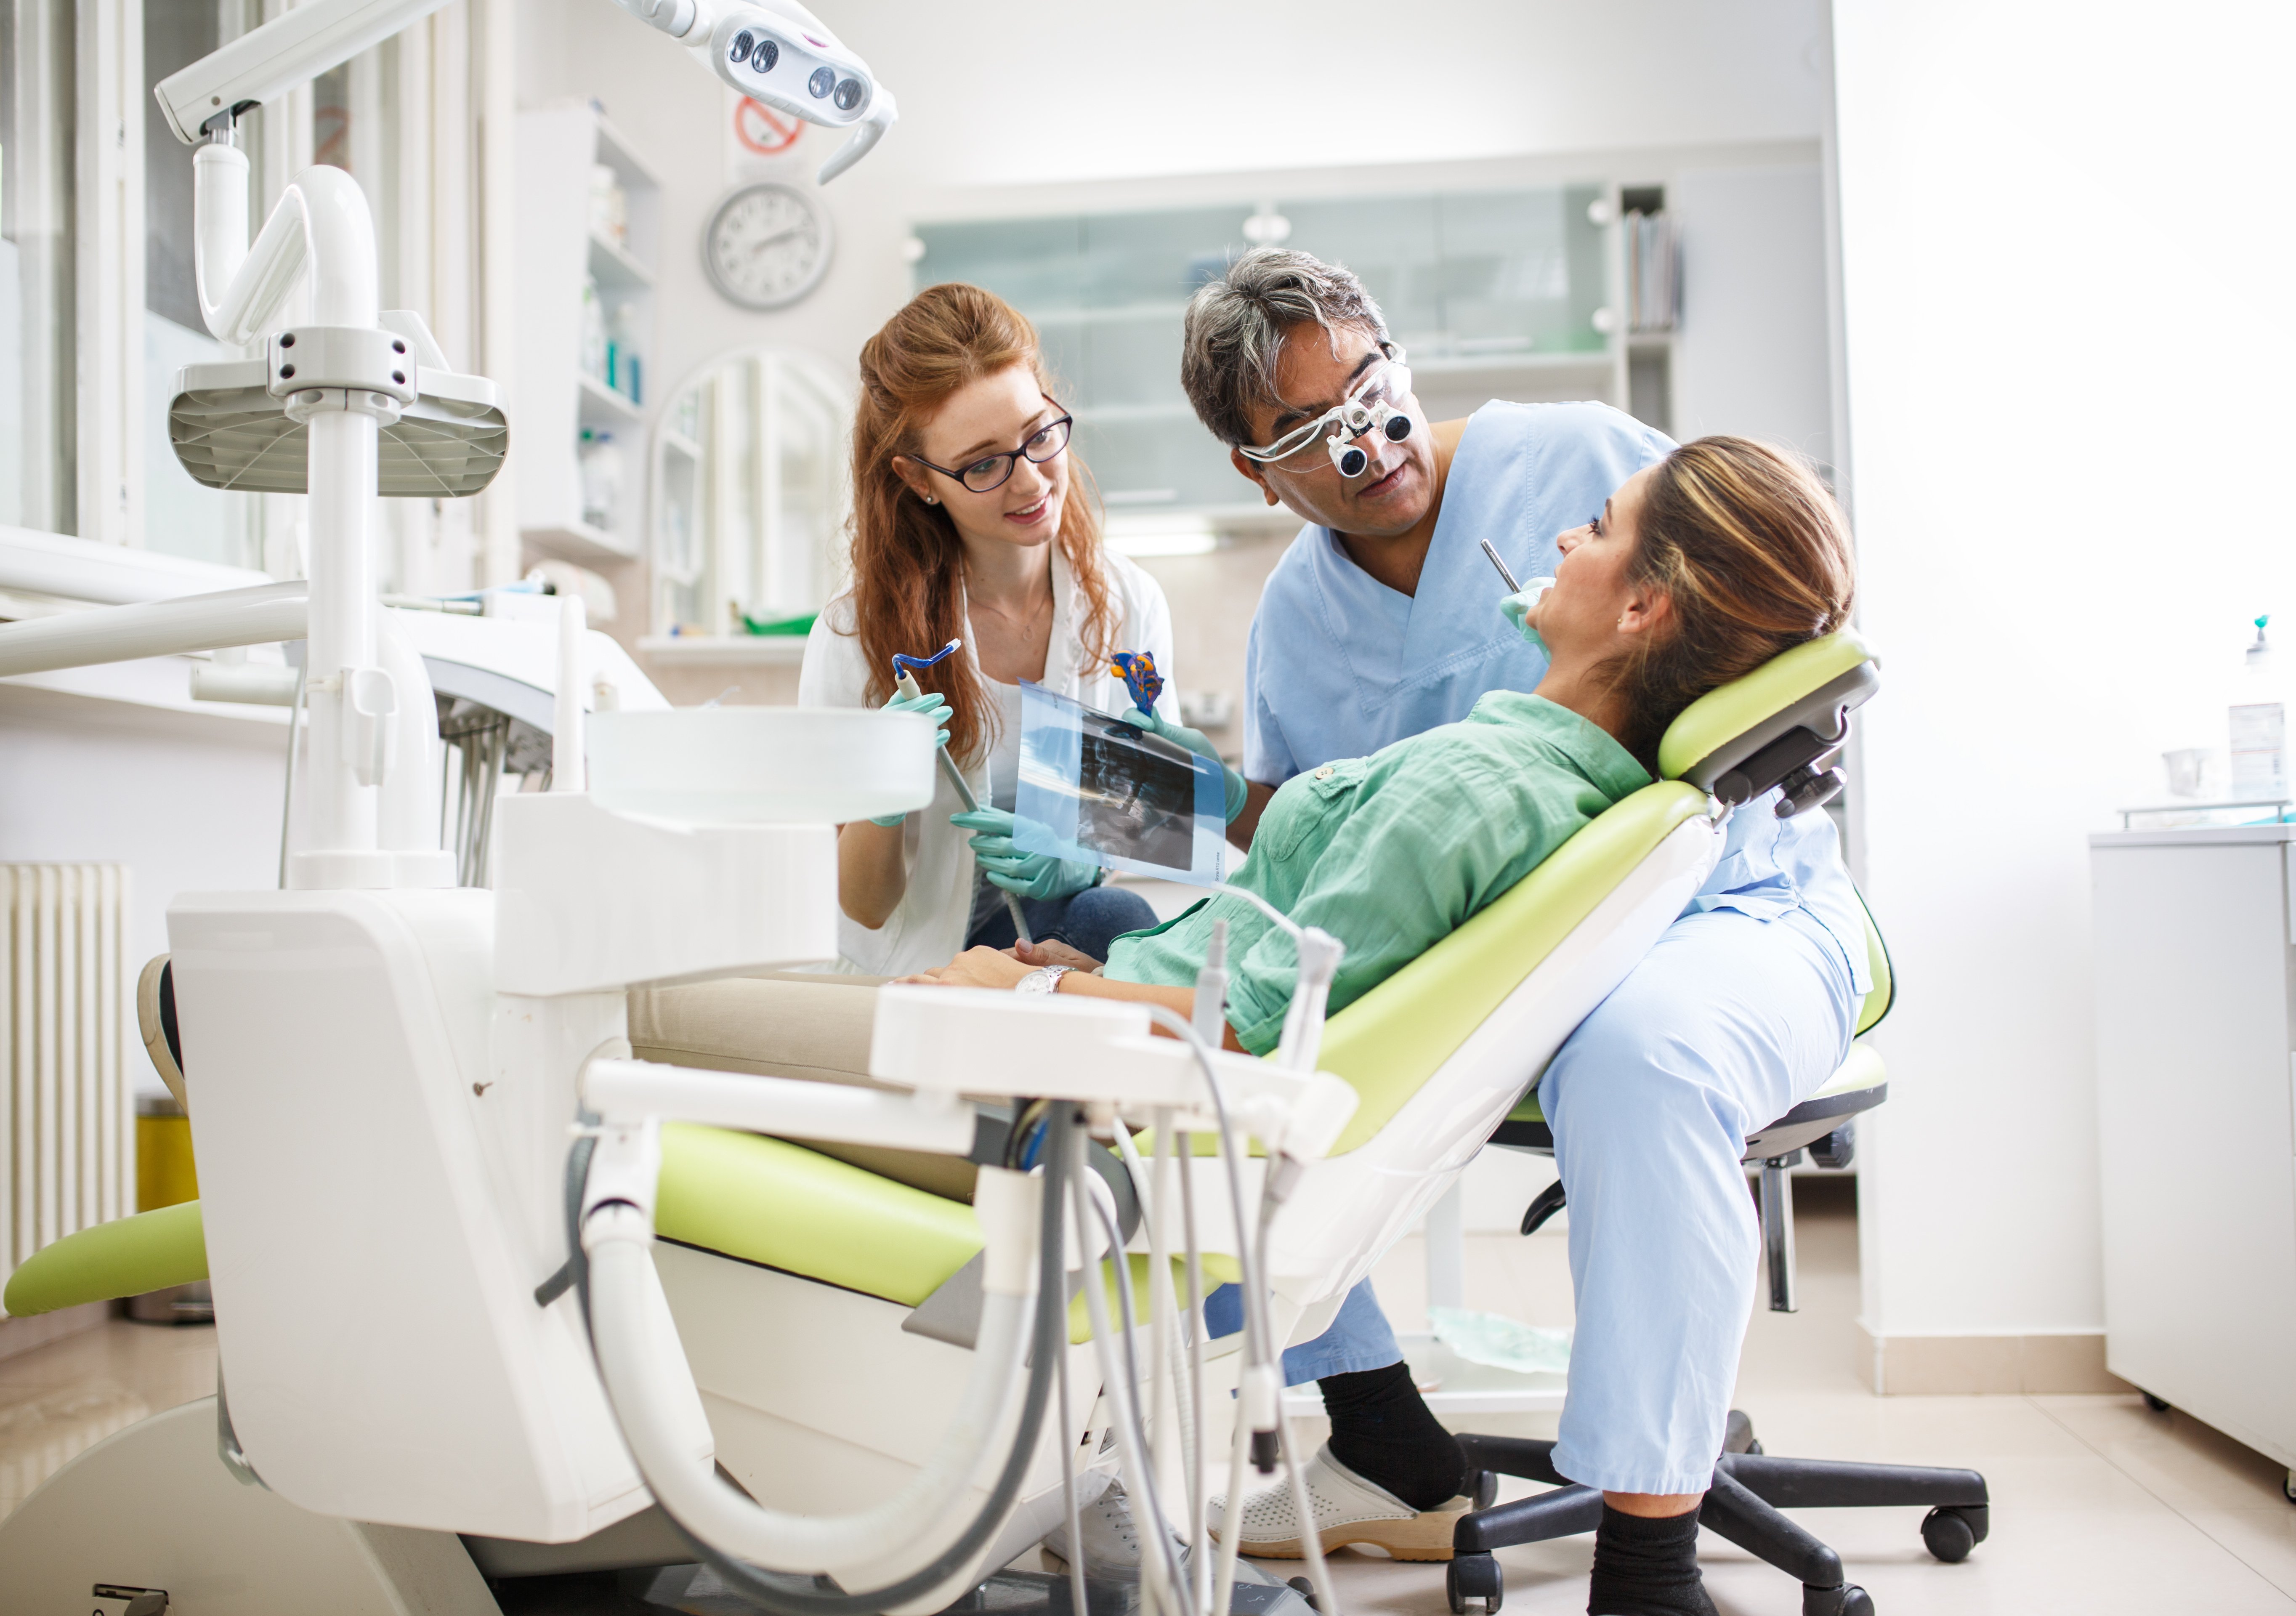 Dentist and assistant attending a patient | Photo: Shutterstock